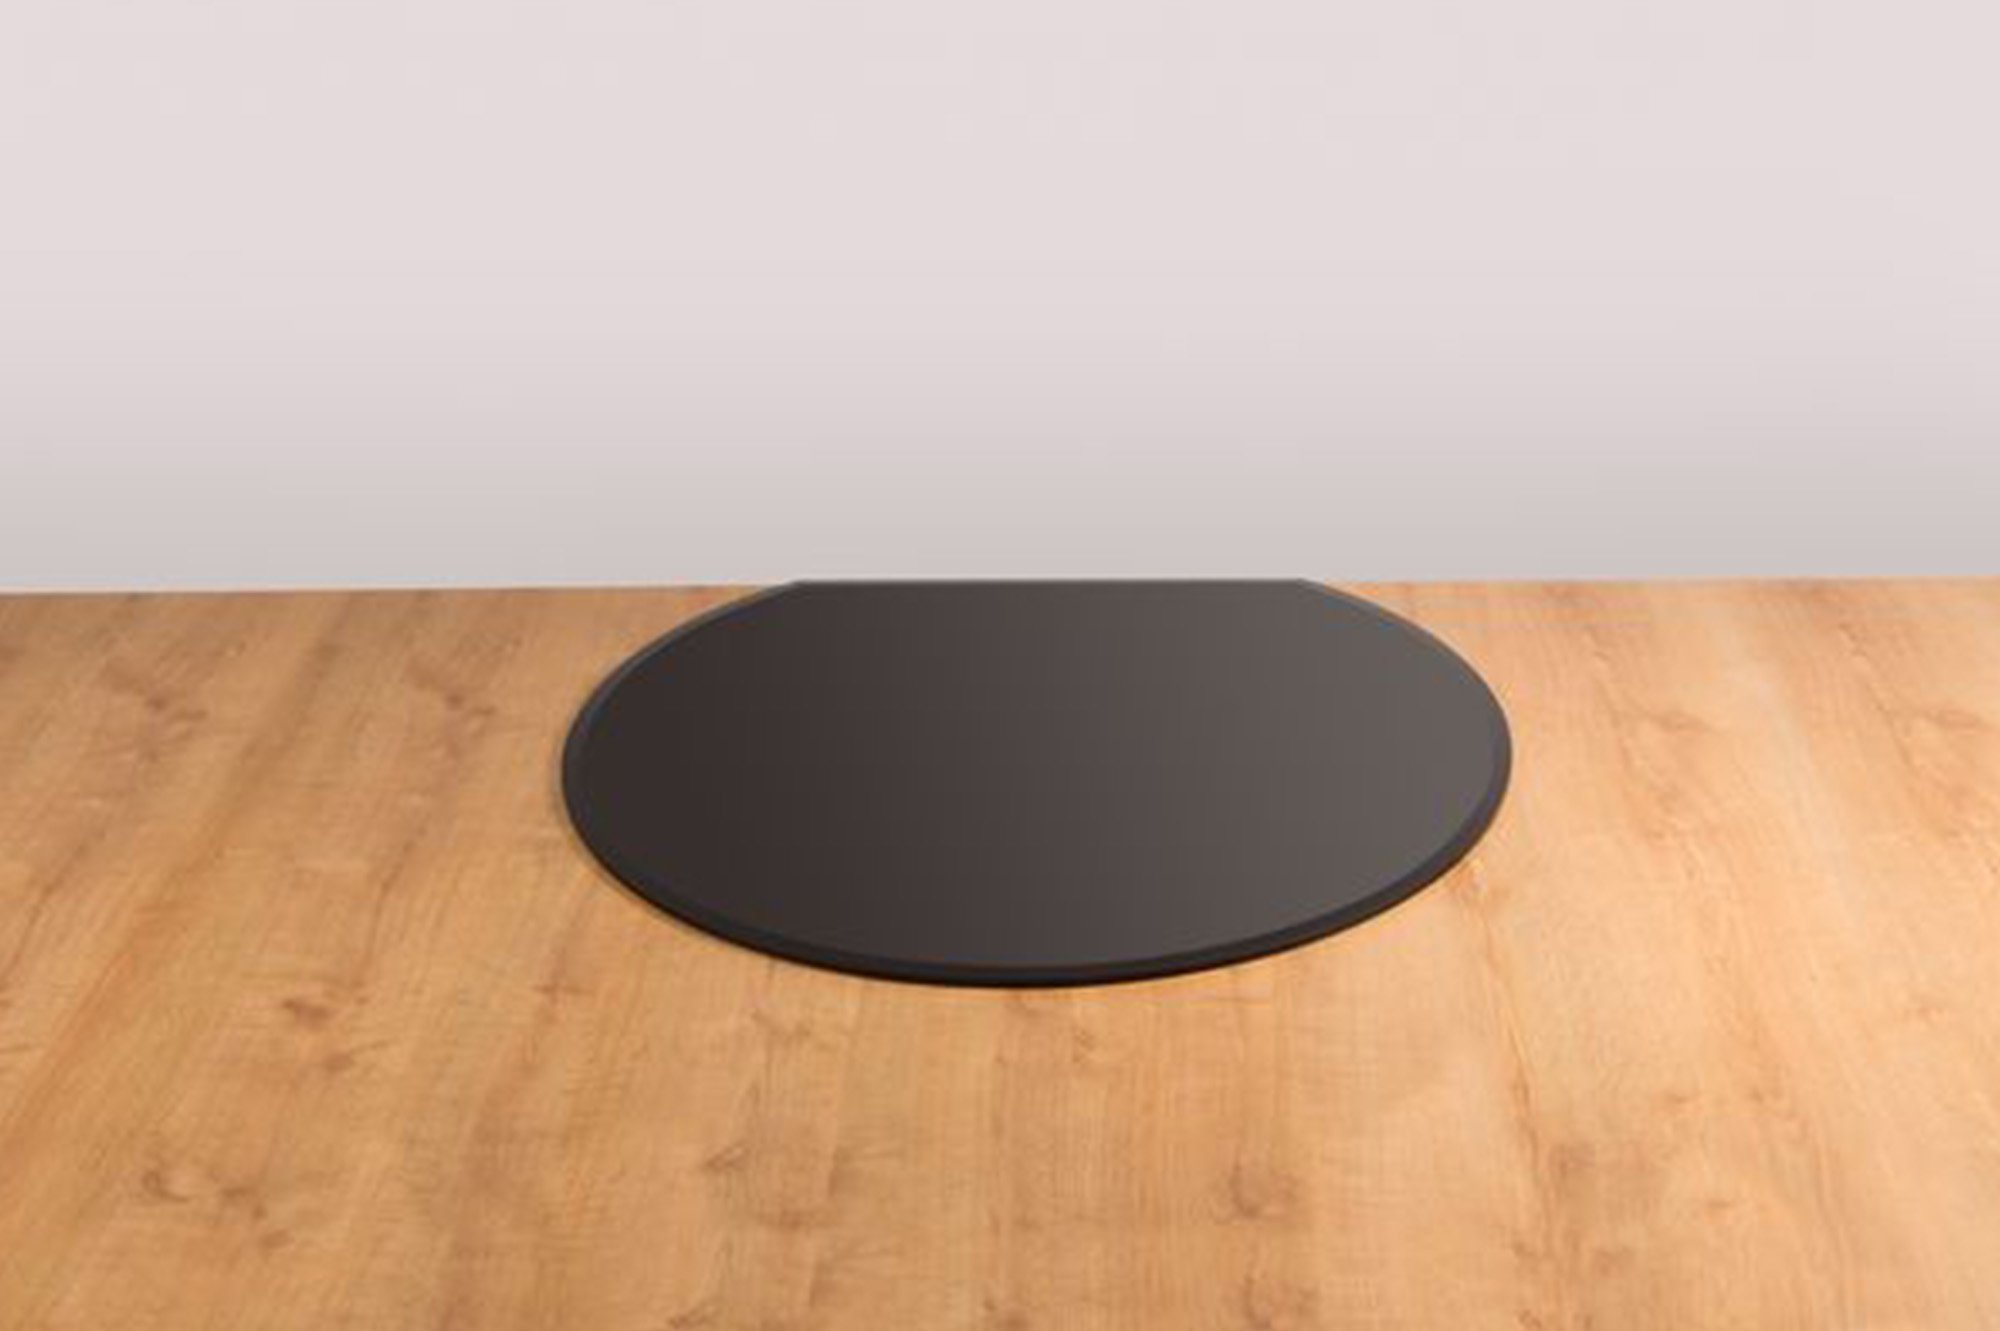 Package includes black glass hearth with flat back